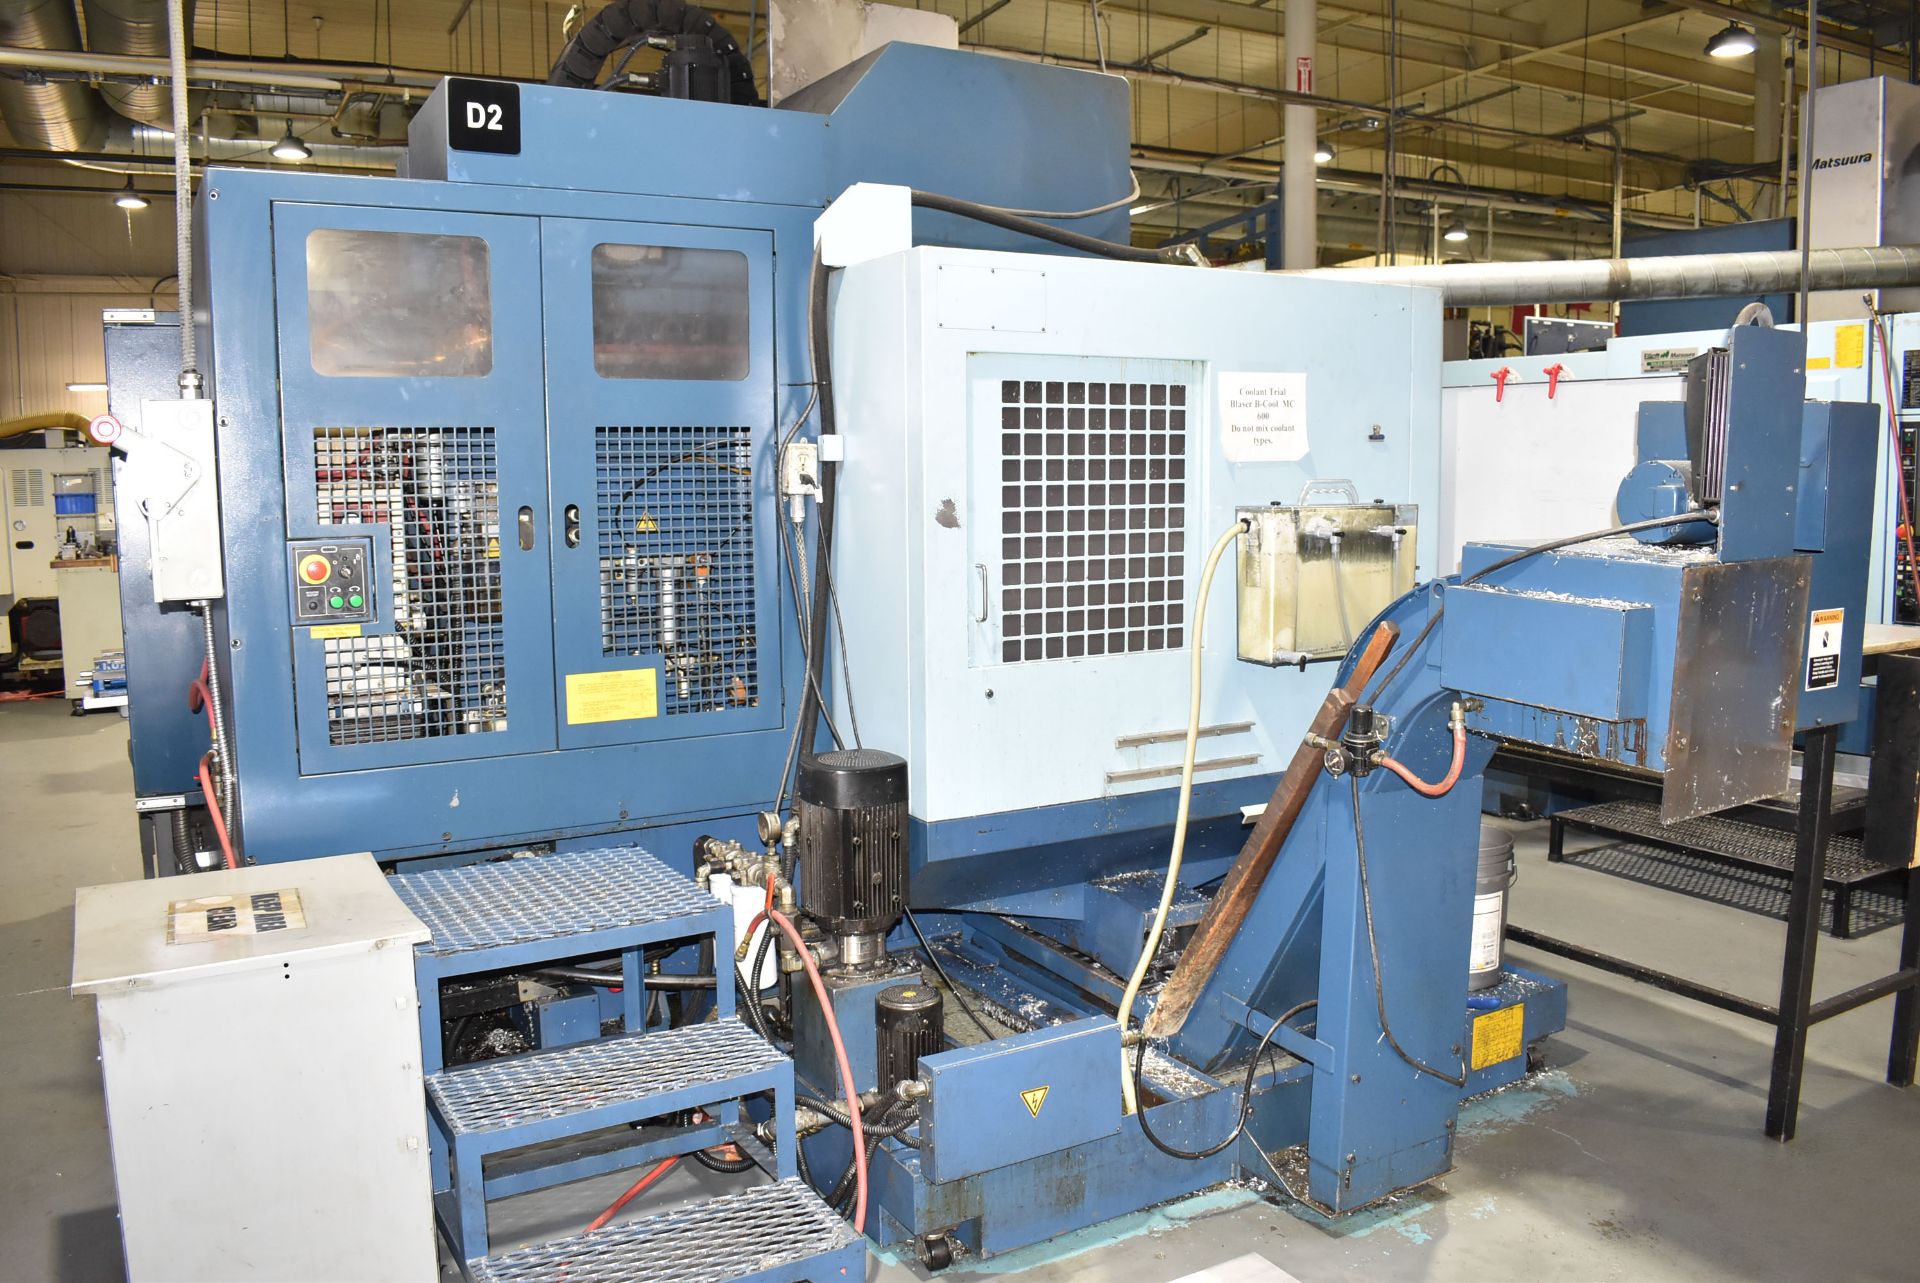 MATSUURA (2000) RA-4G TWIN-PALLET HIGH-SPEED CNC VERTICAL MACHINING CENTER WITH YASNAC J300M CNC - Image 13 of 13